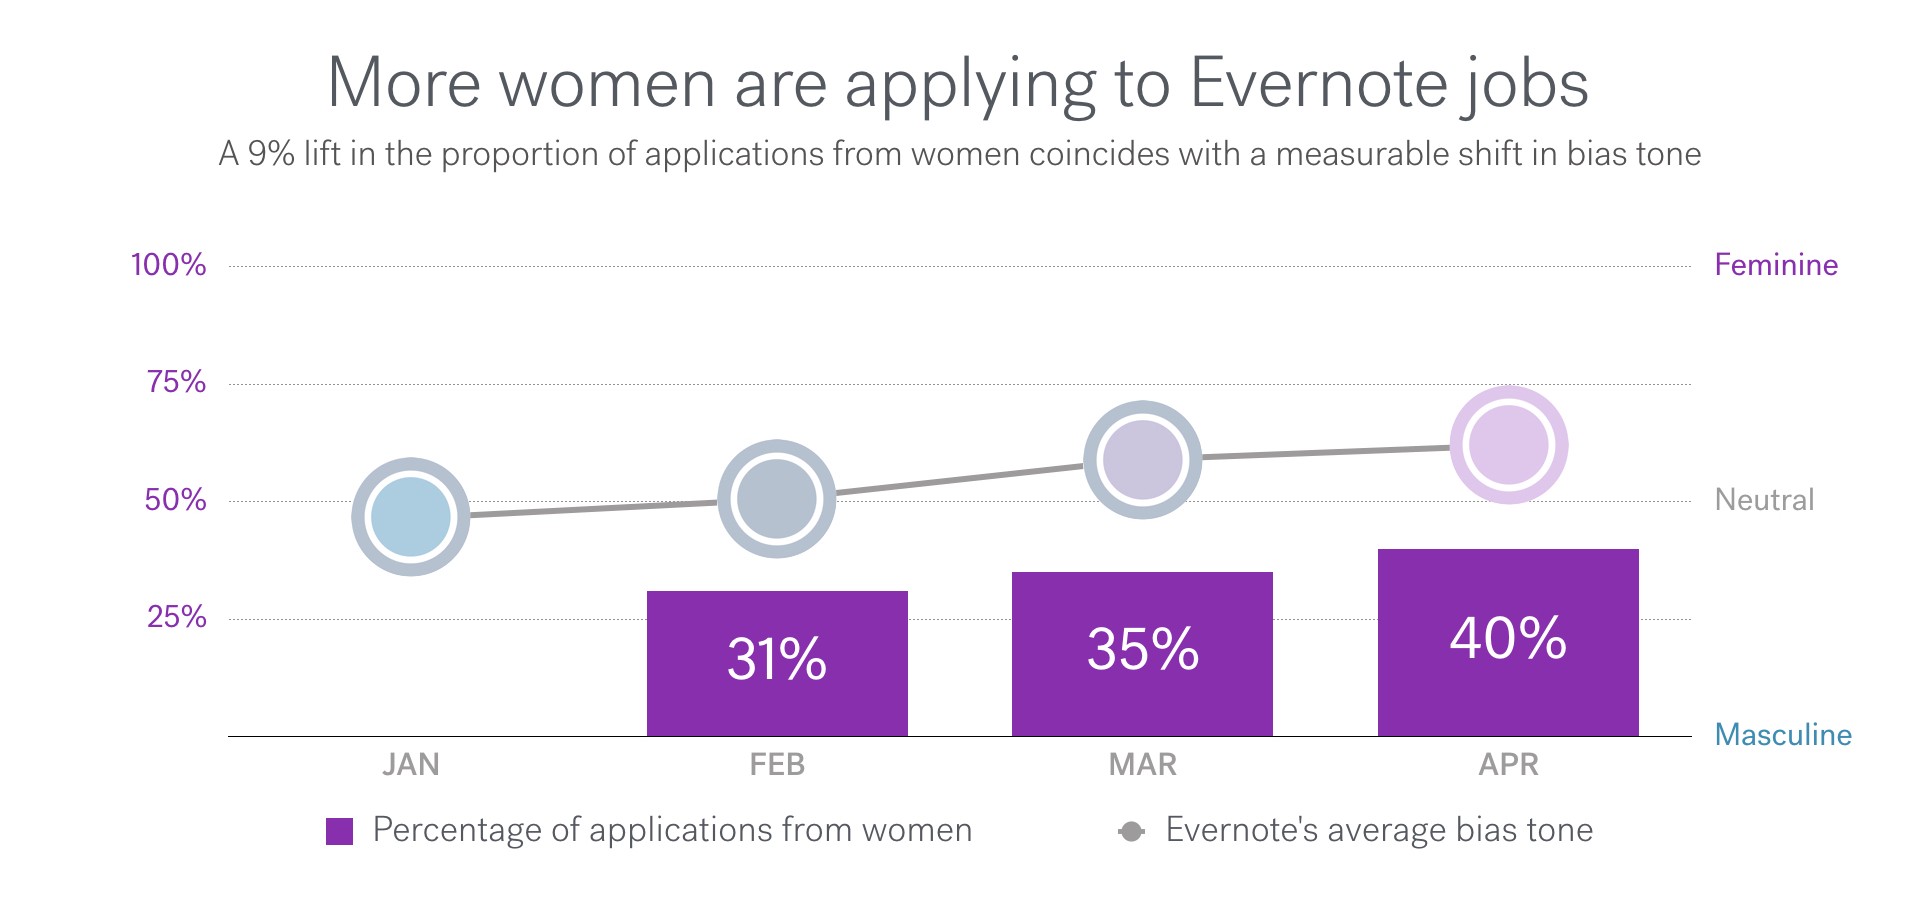 Graph showing a 9% lift in the proportion of applications from women coincides with a measurable shift in bias tone